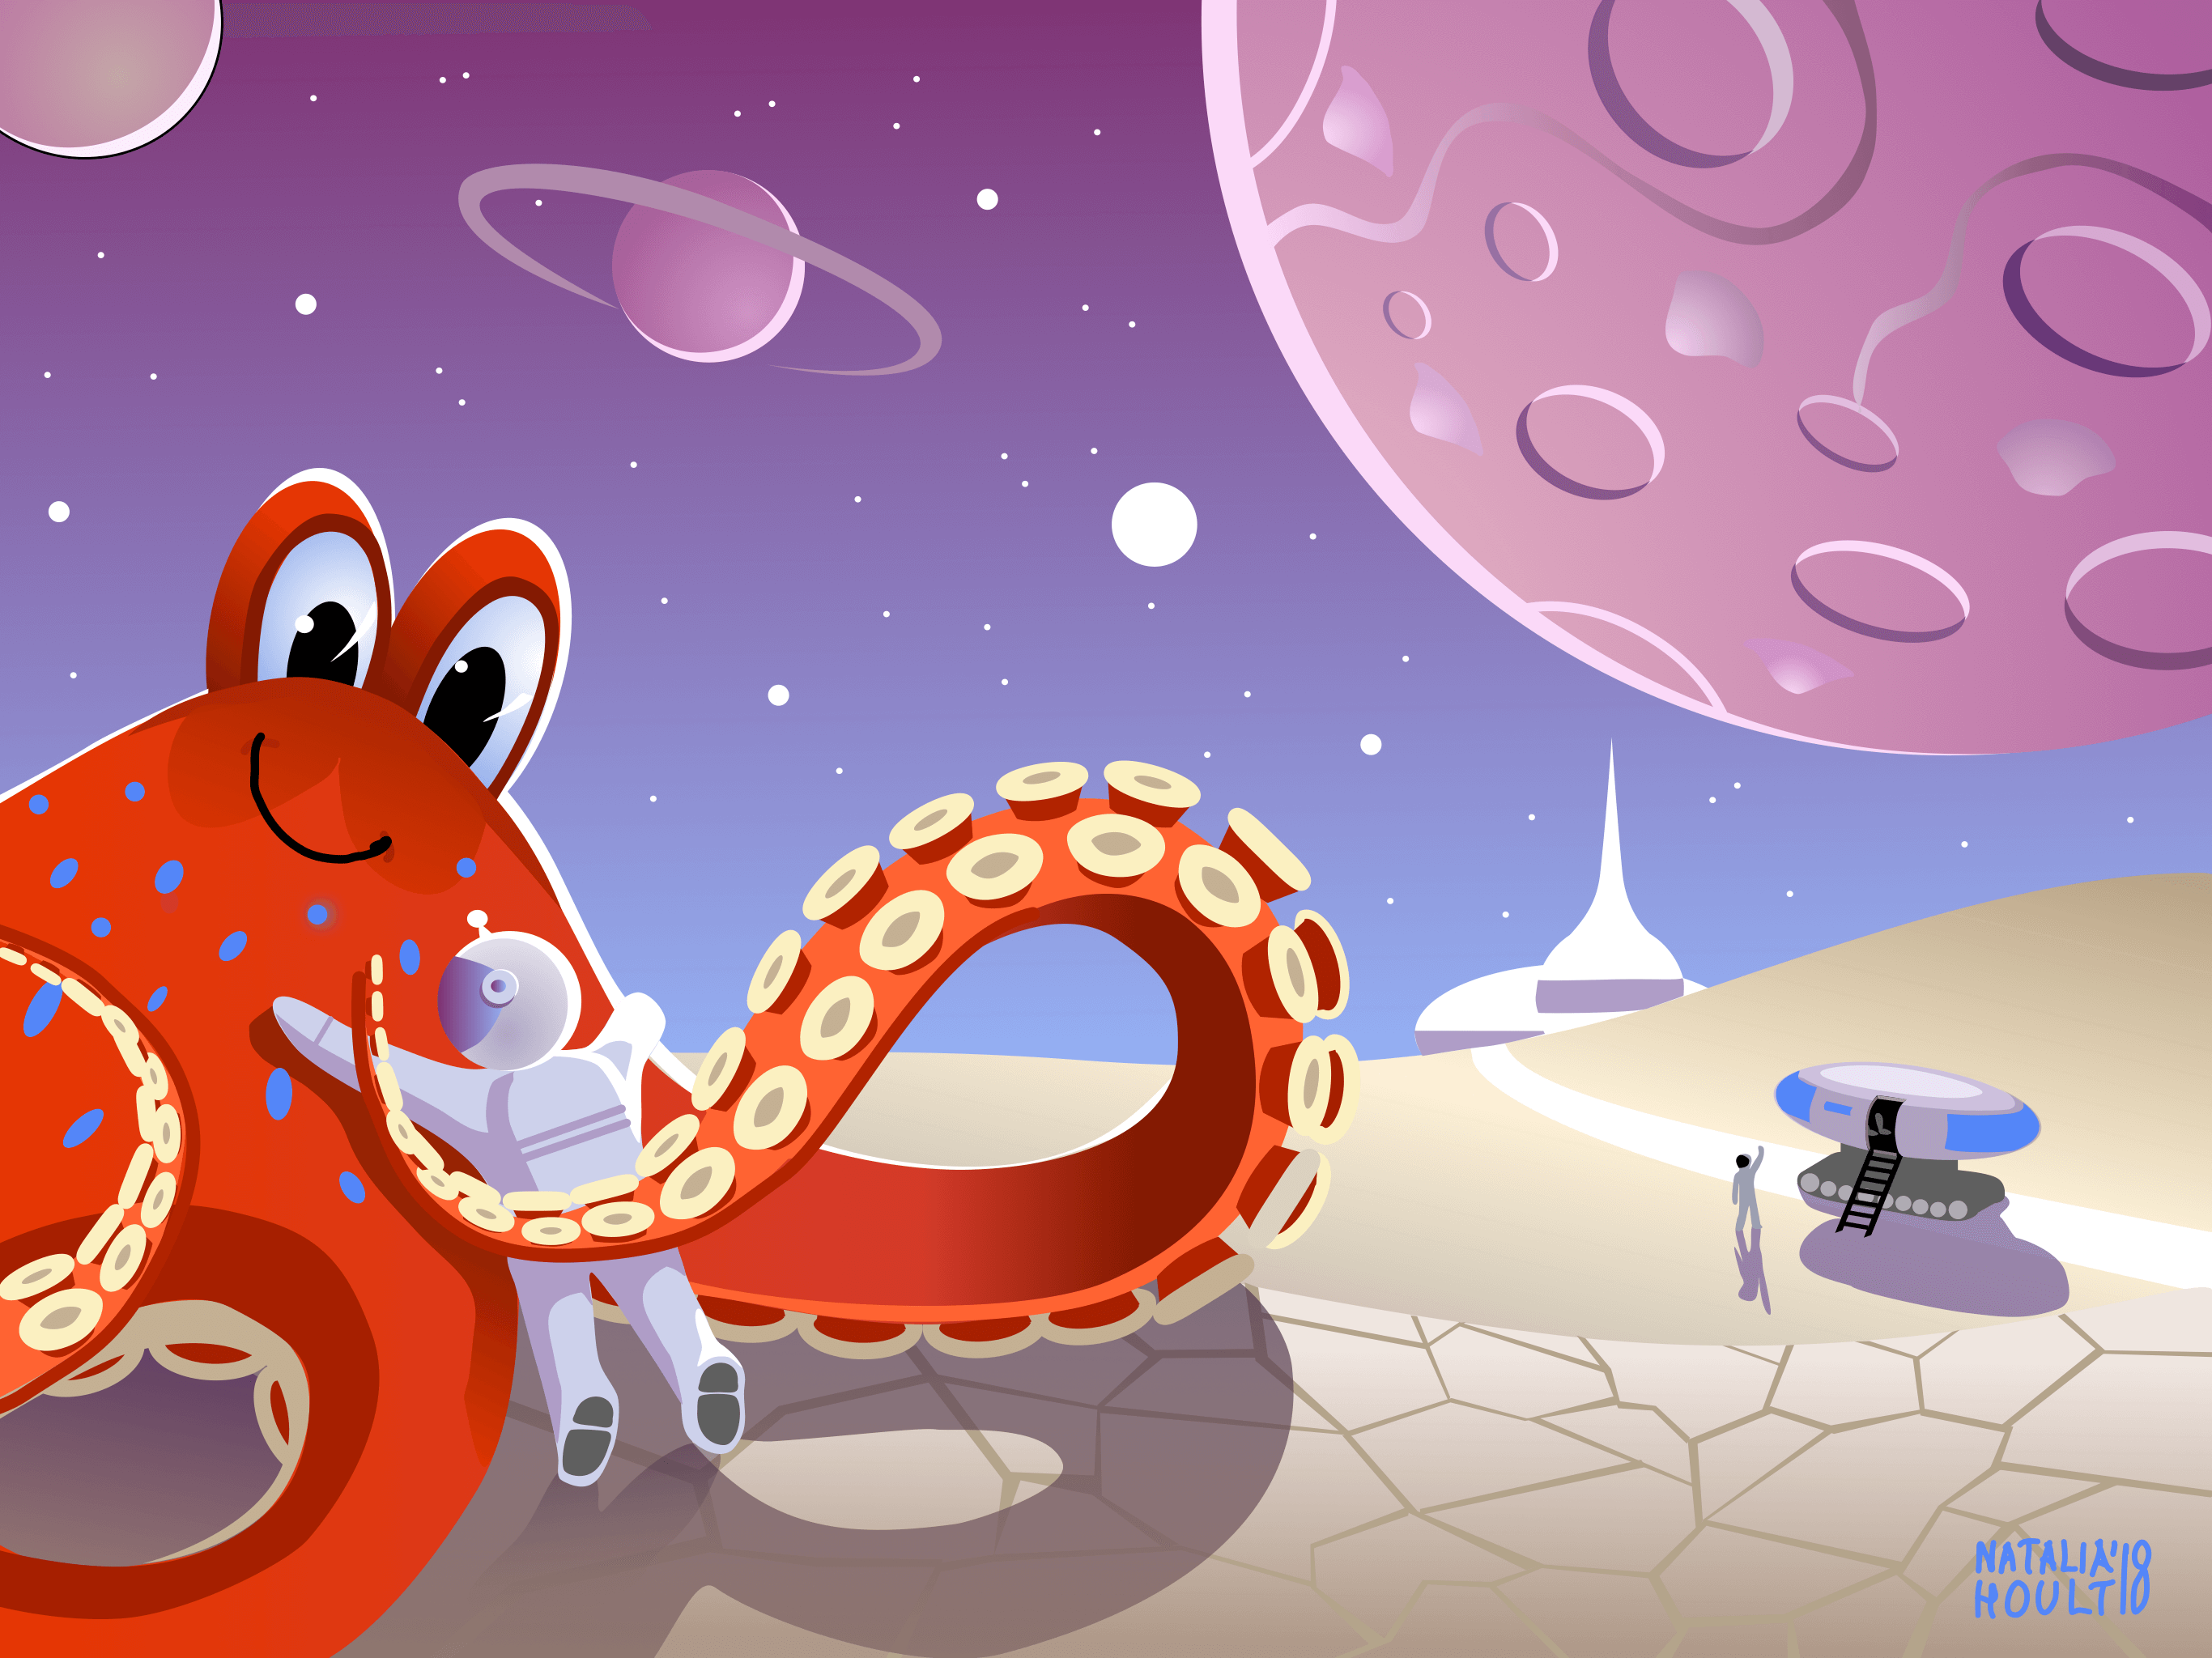 Cheerful cartoon octopus interacting with an astronaut on an extraterrestrial surface